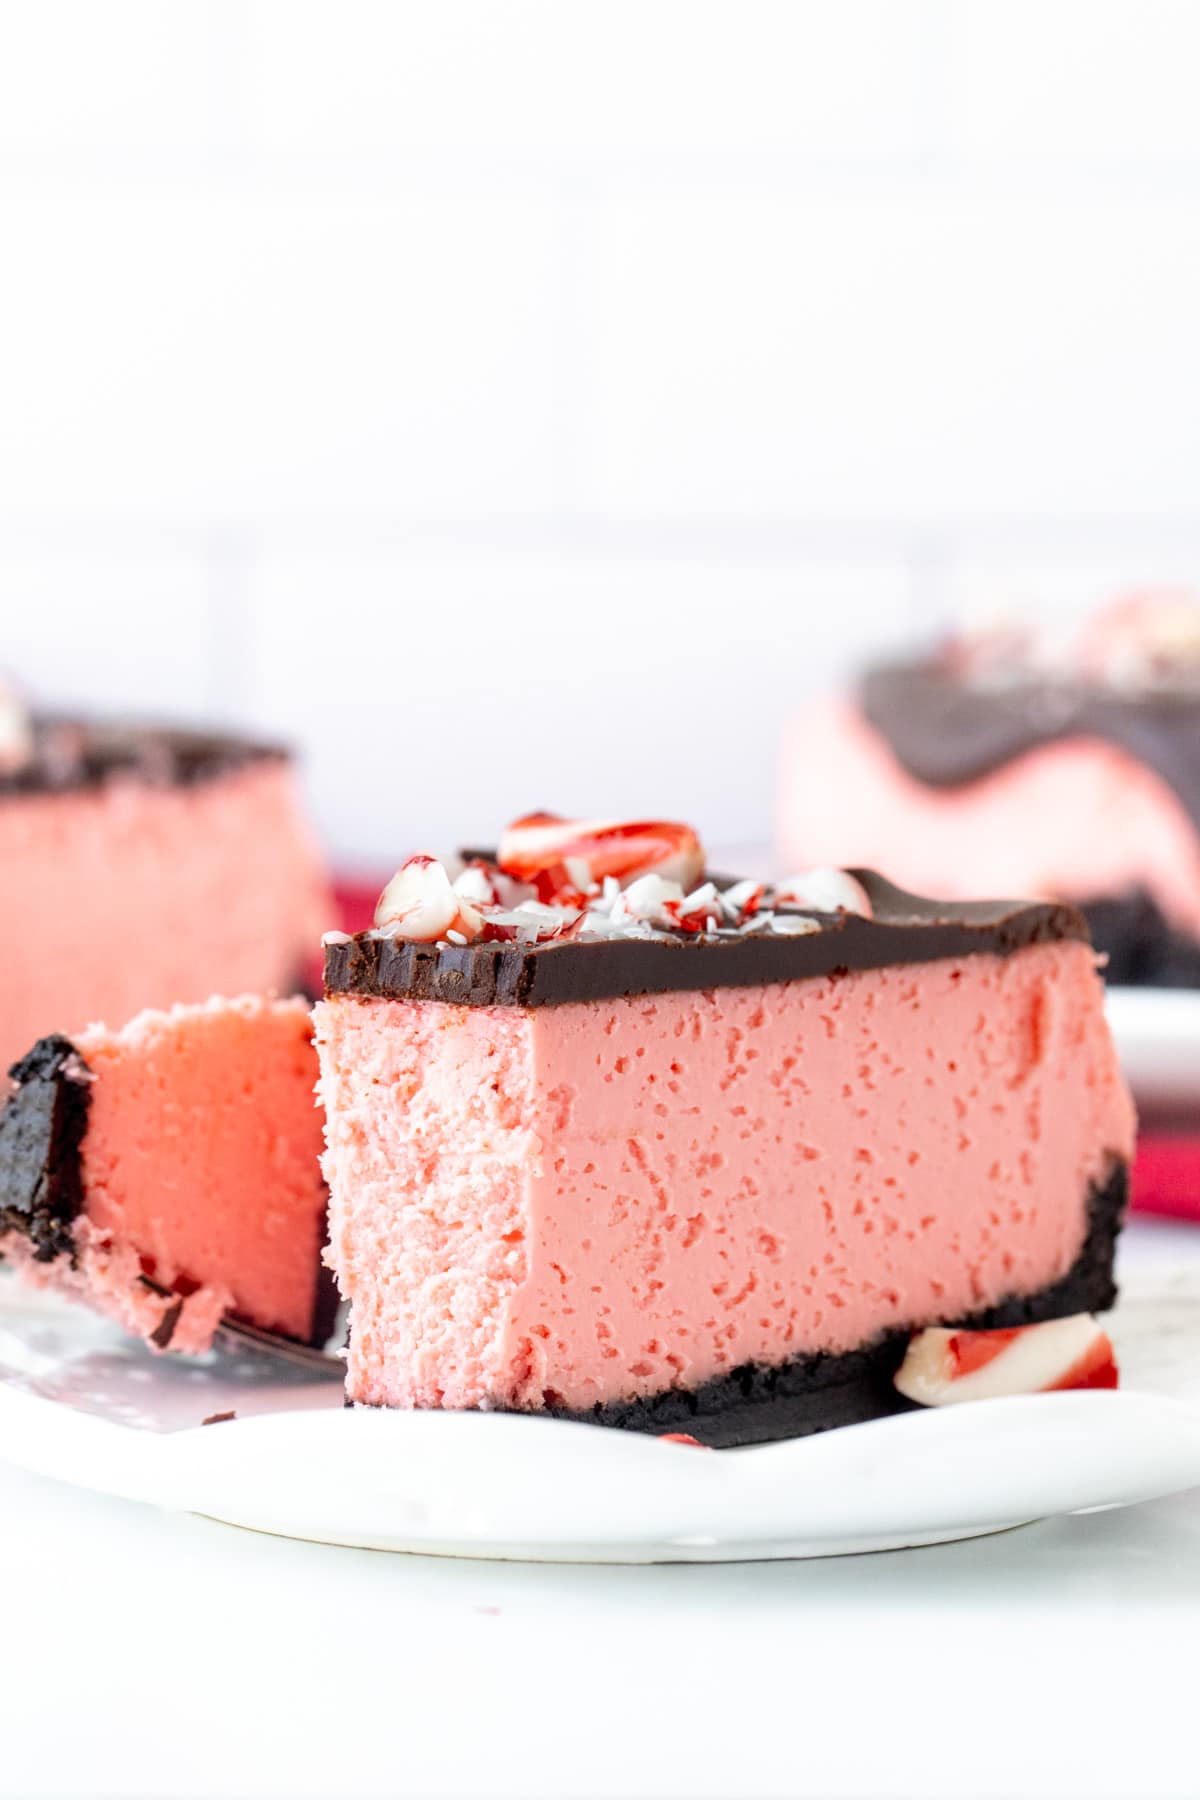 Slice of peppermint cheesecake on a plate with a bite taken out